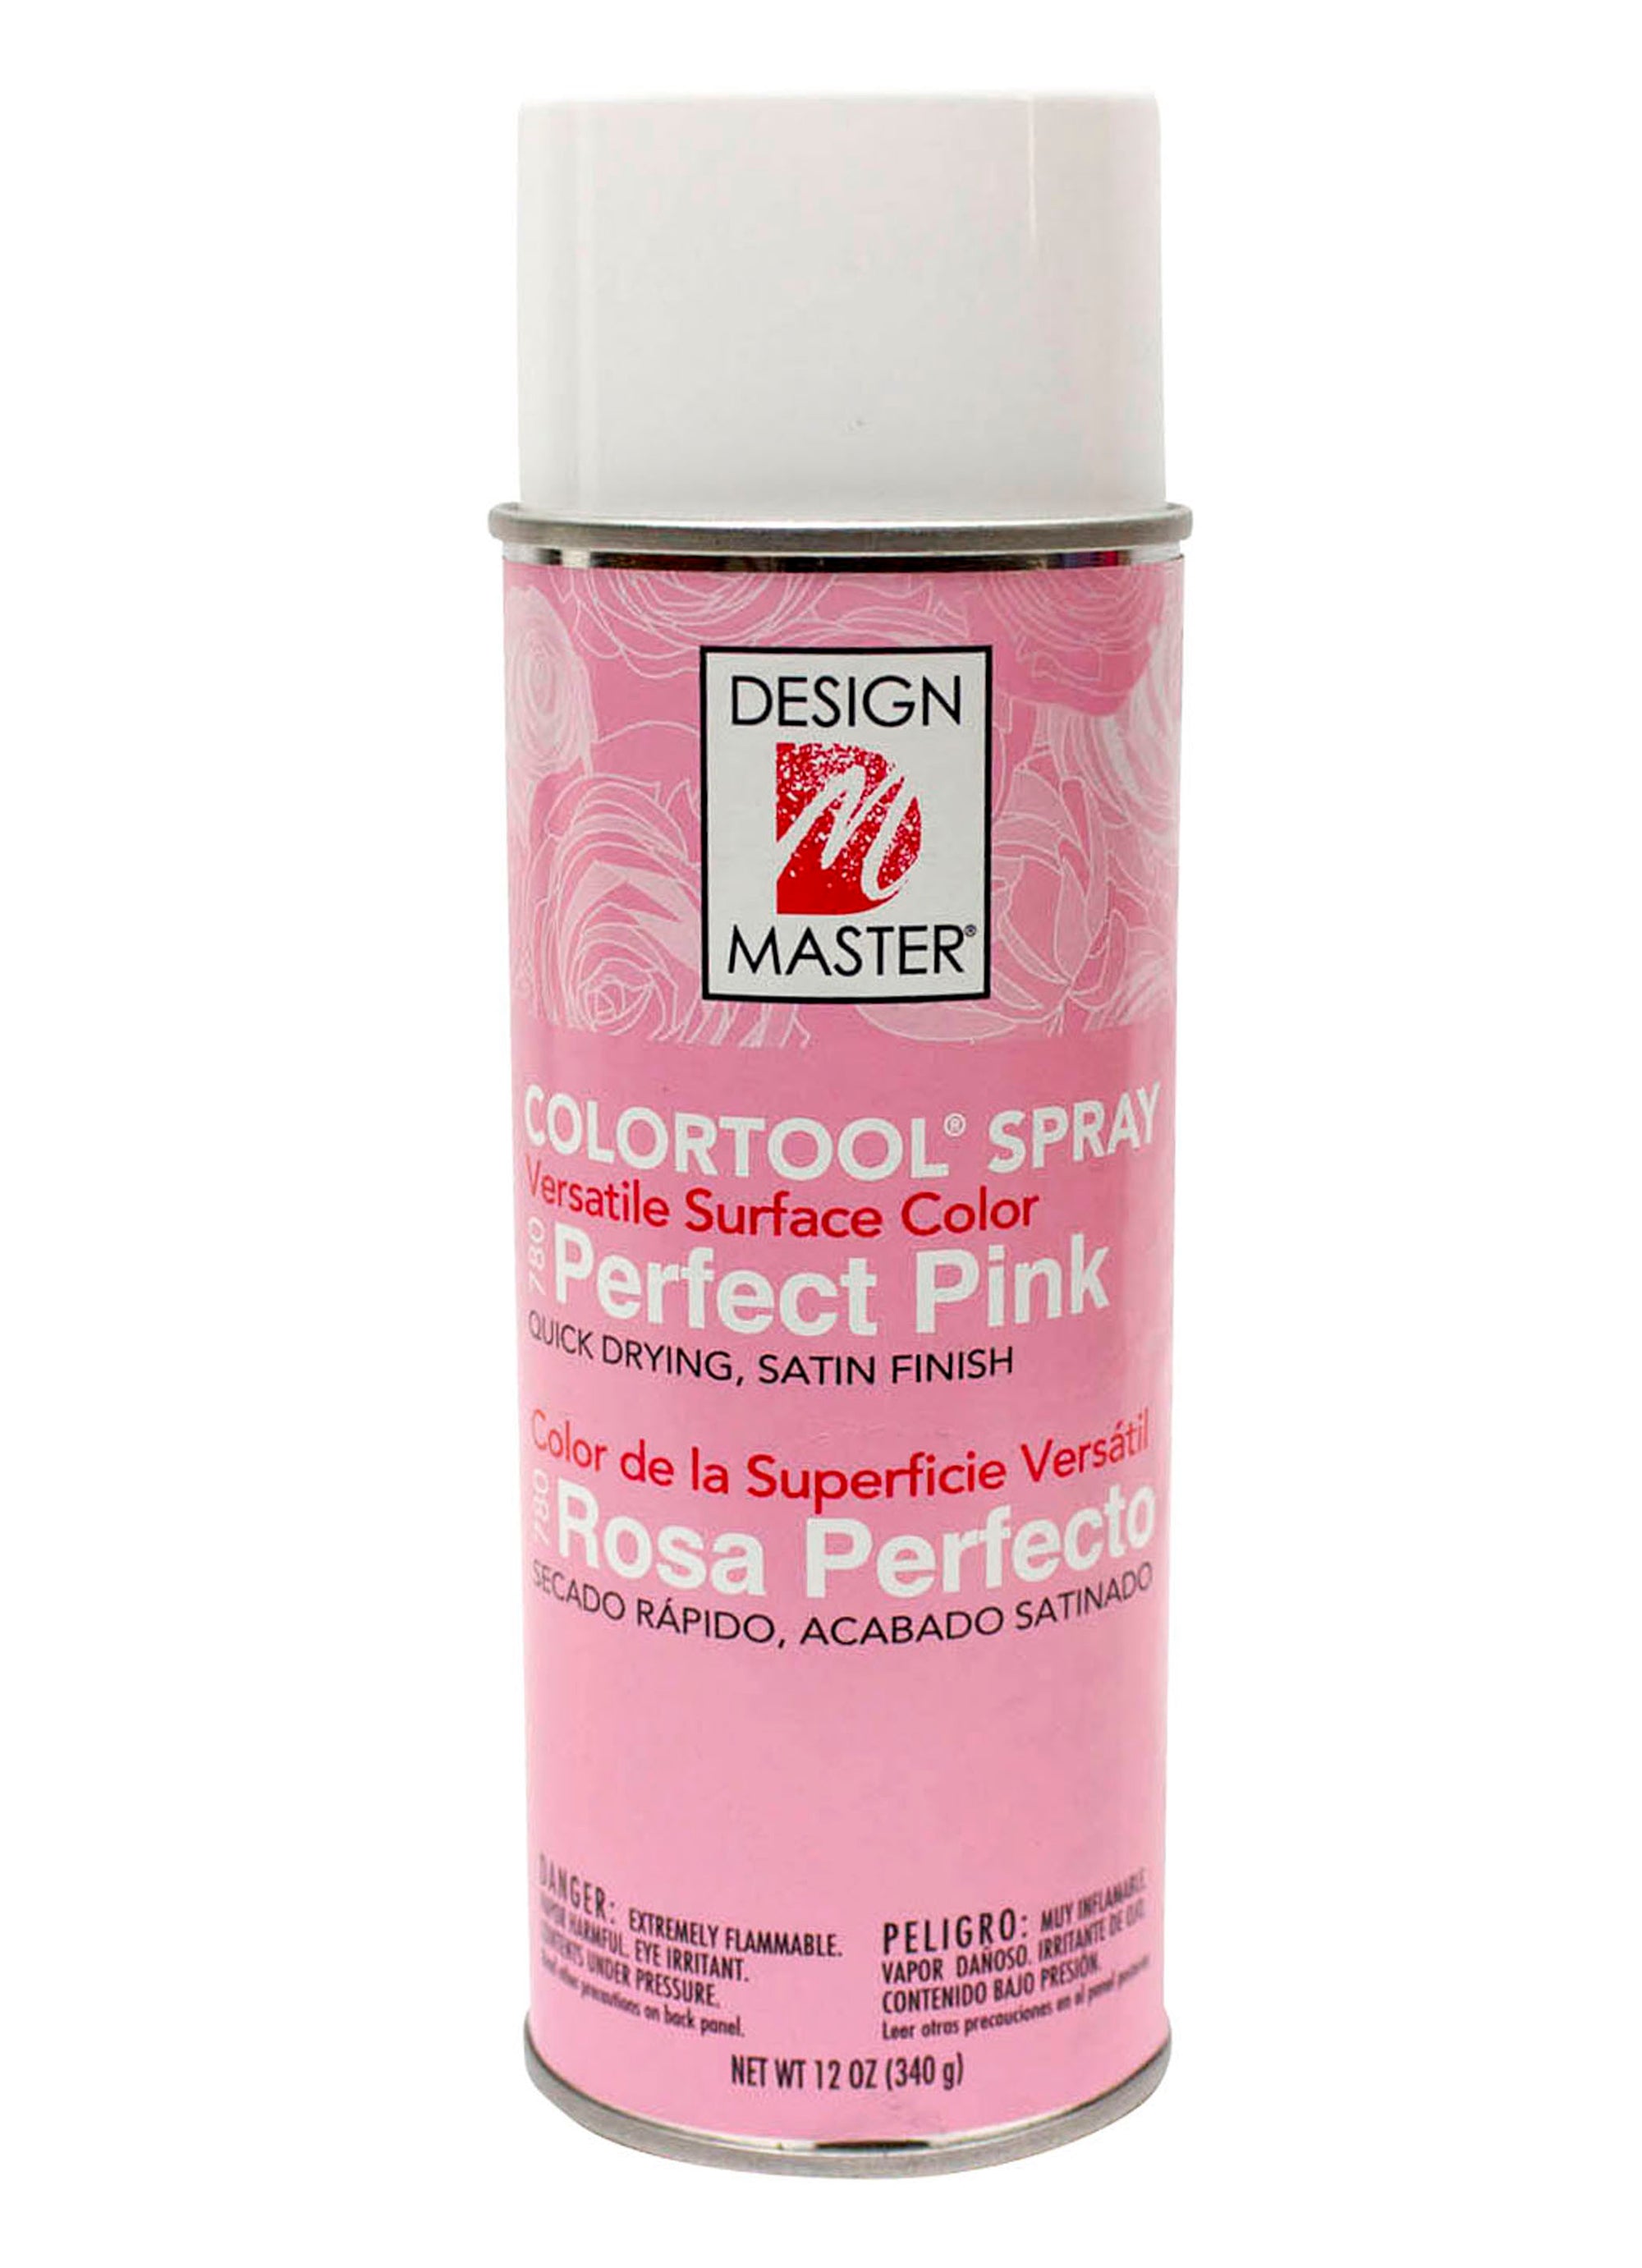 Design Master Colortool Floral Spray Paint 12 Ounces Carnation Red